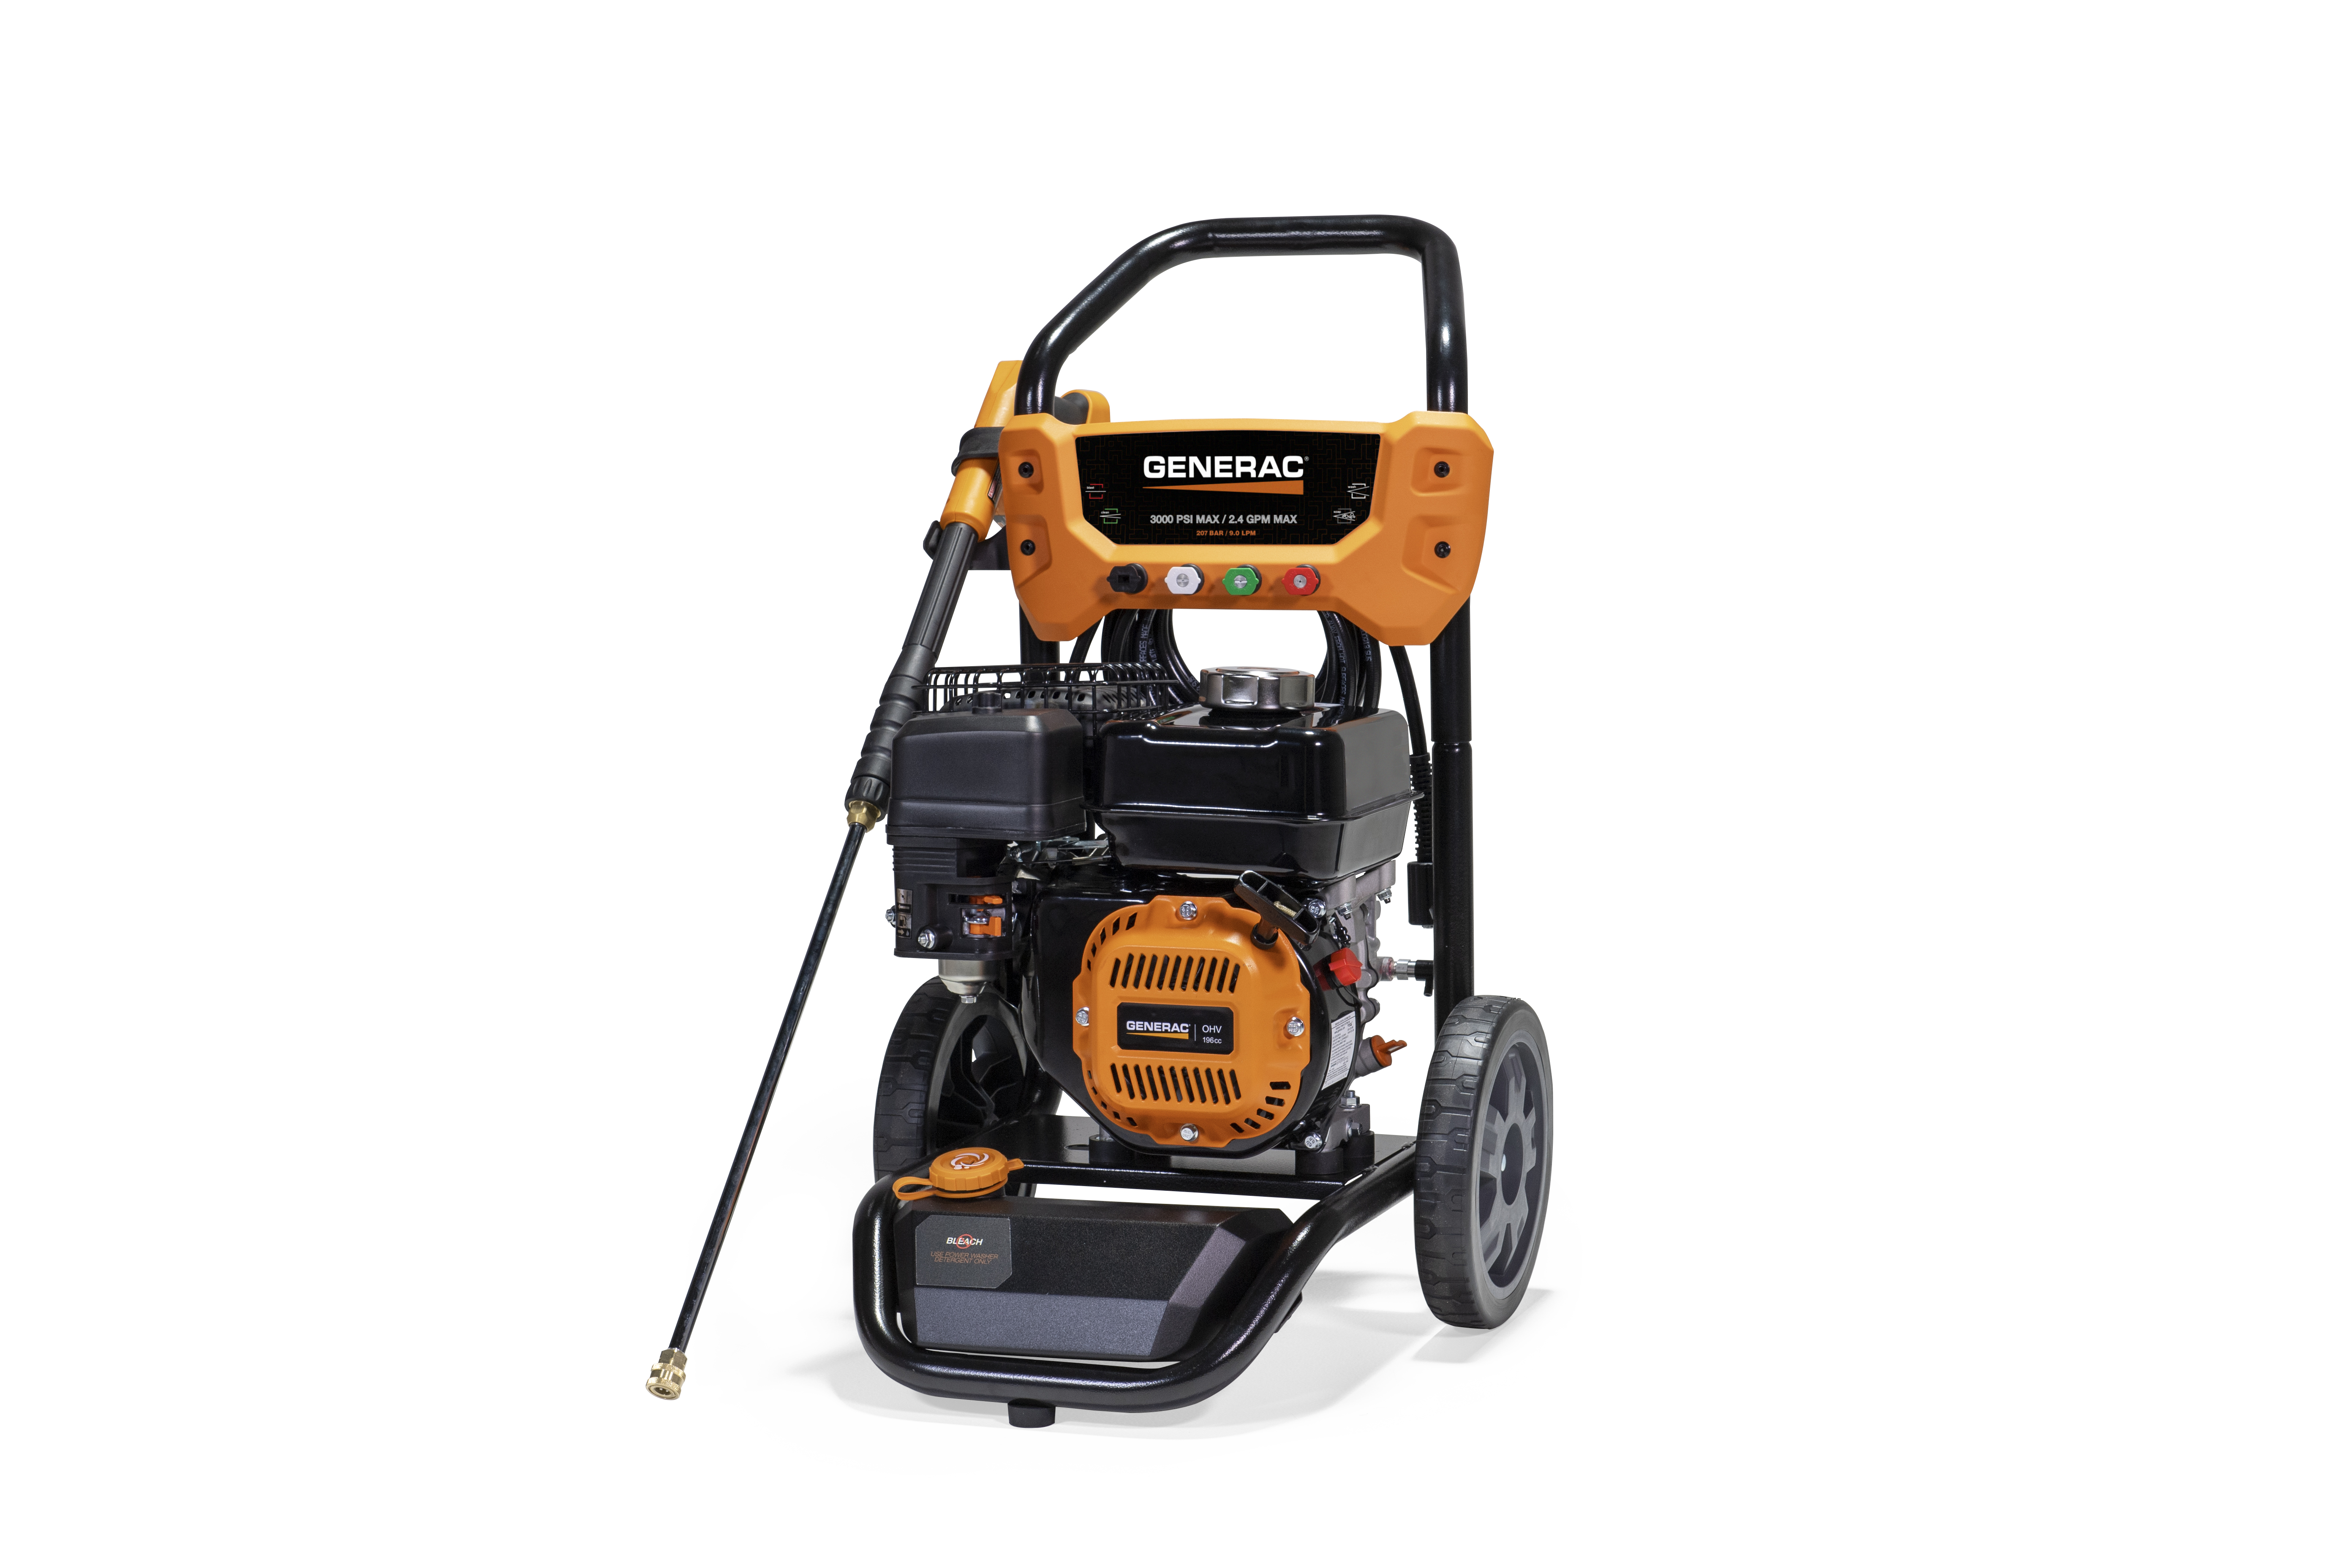 Generac 8896 3000 PSI 2.4GPM Gas Powered Residential Pressure Washer - image 3 of 3